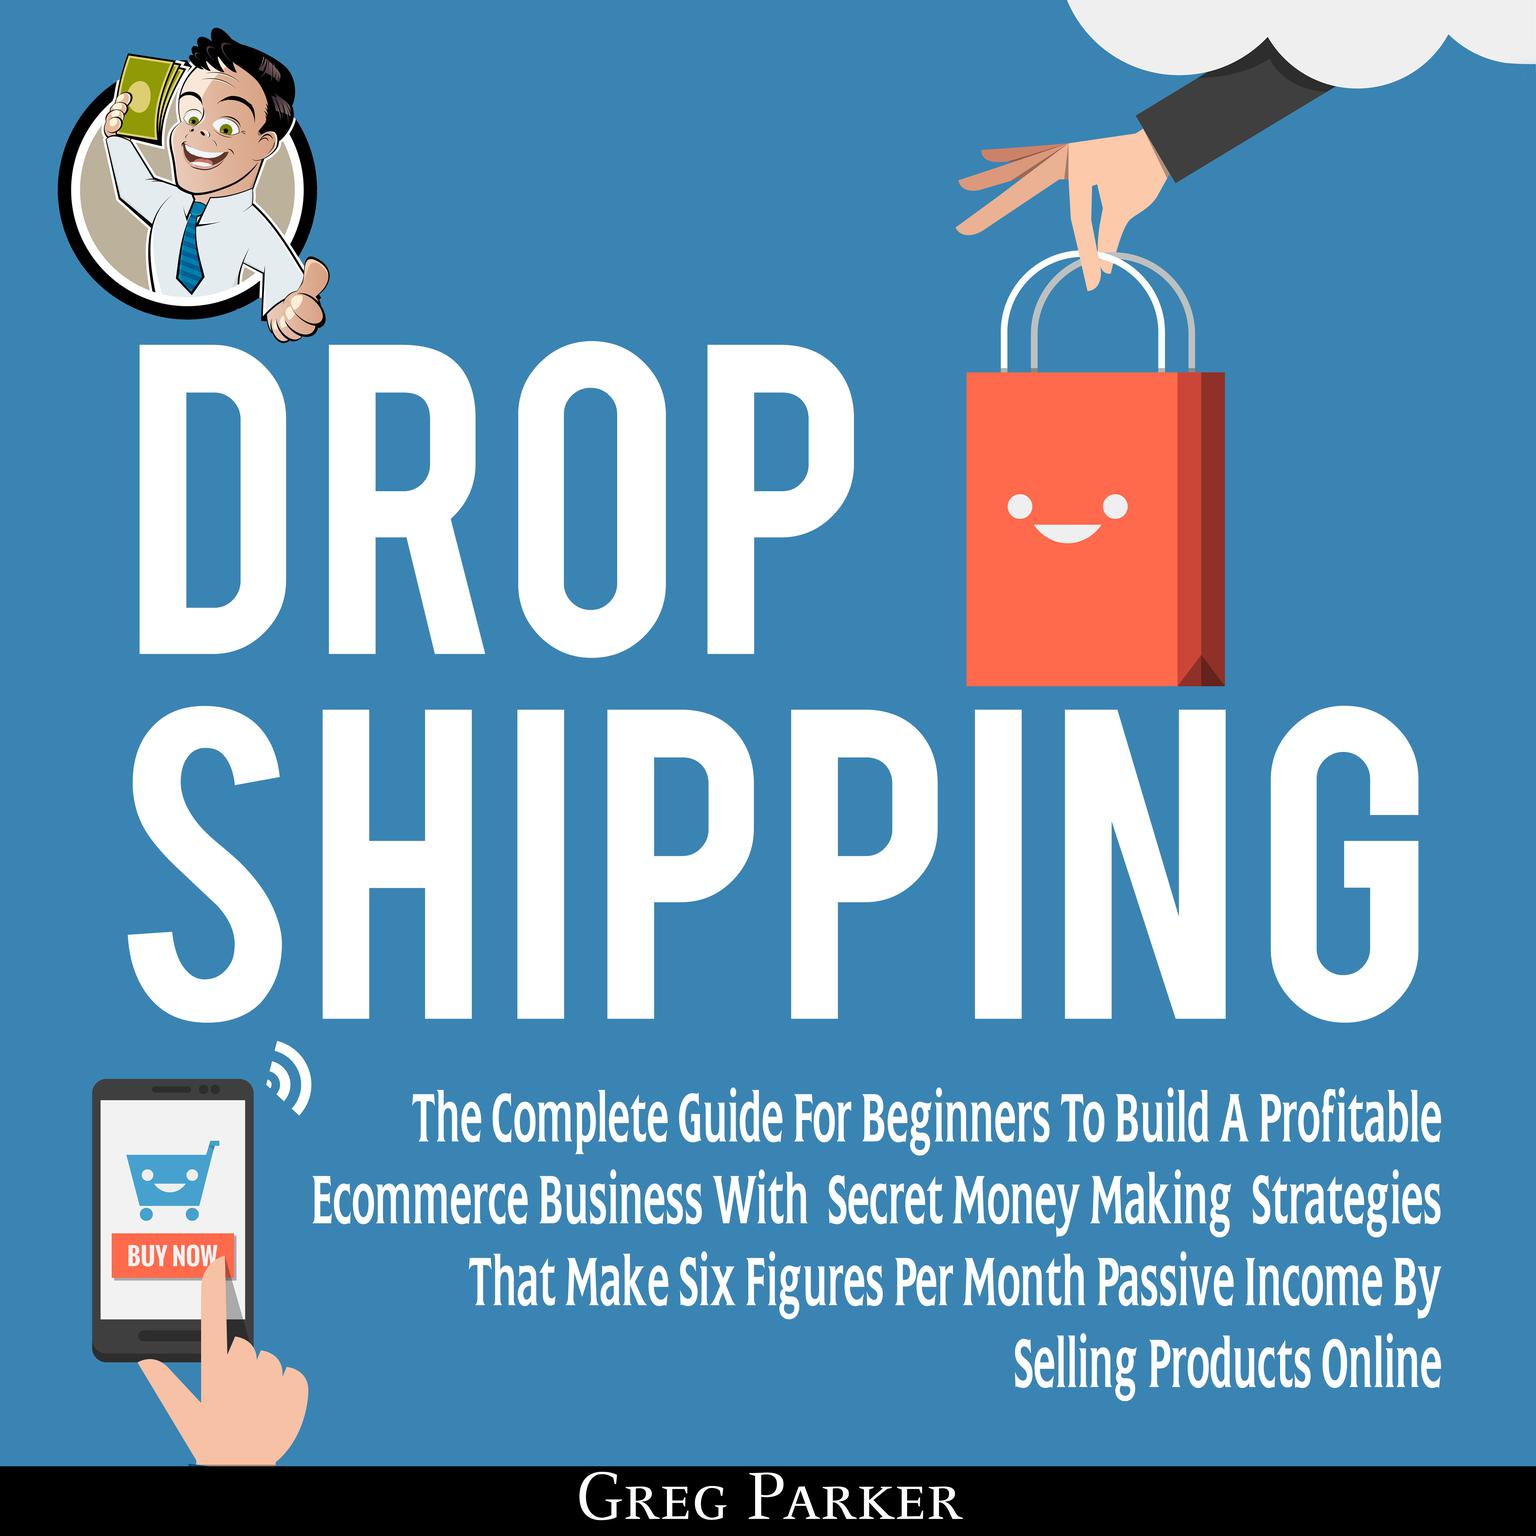 Dropshipping: The Complete Guide For Beginners To Build A Profitable Ecommerce Business With Secret Money Making Strategies That Make Six Figures Per Month Passive Income By Selling Products Online Audiobook, by Greg Parker